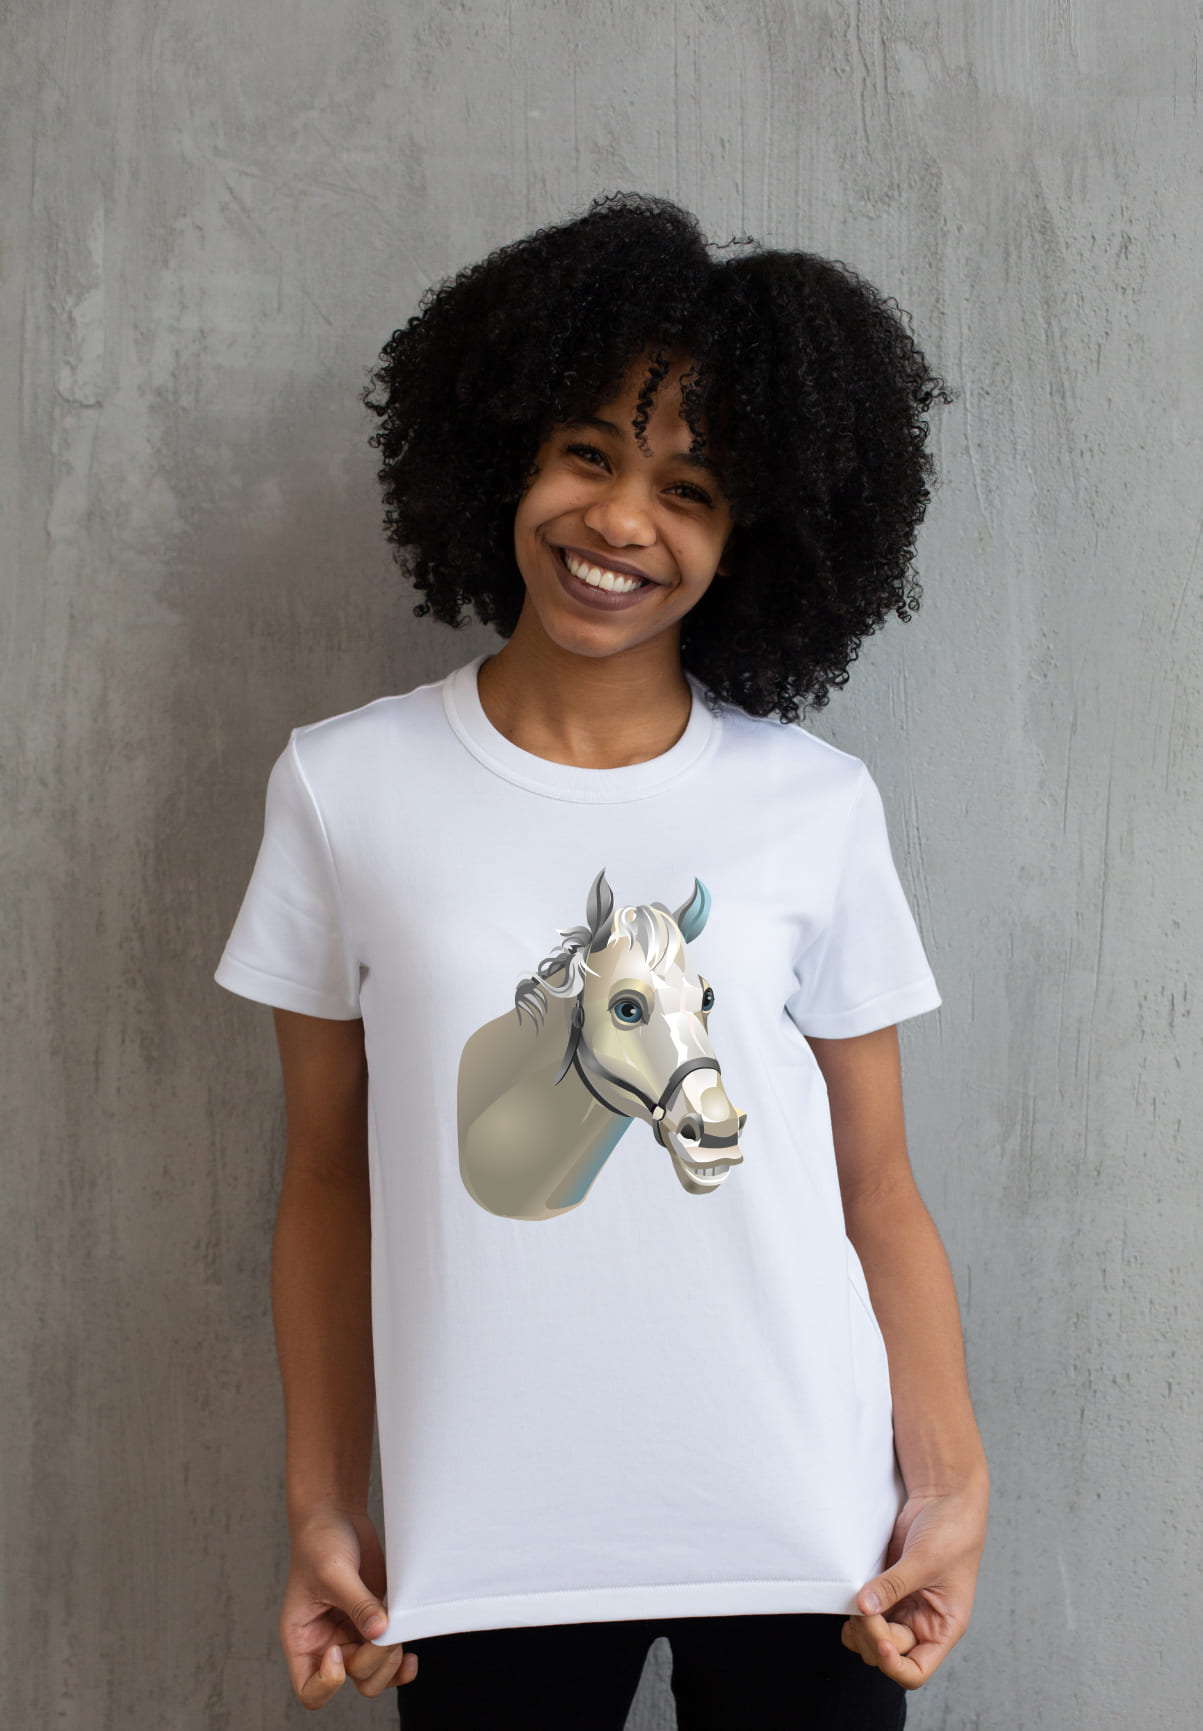 White t-shirt with a gray horse face on a girl.